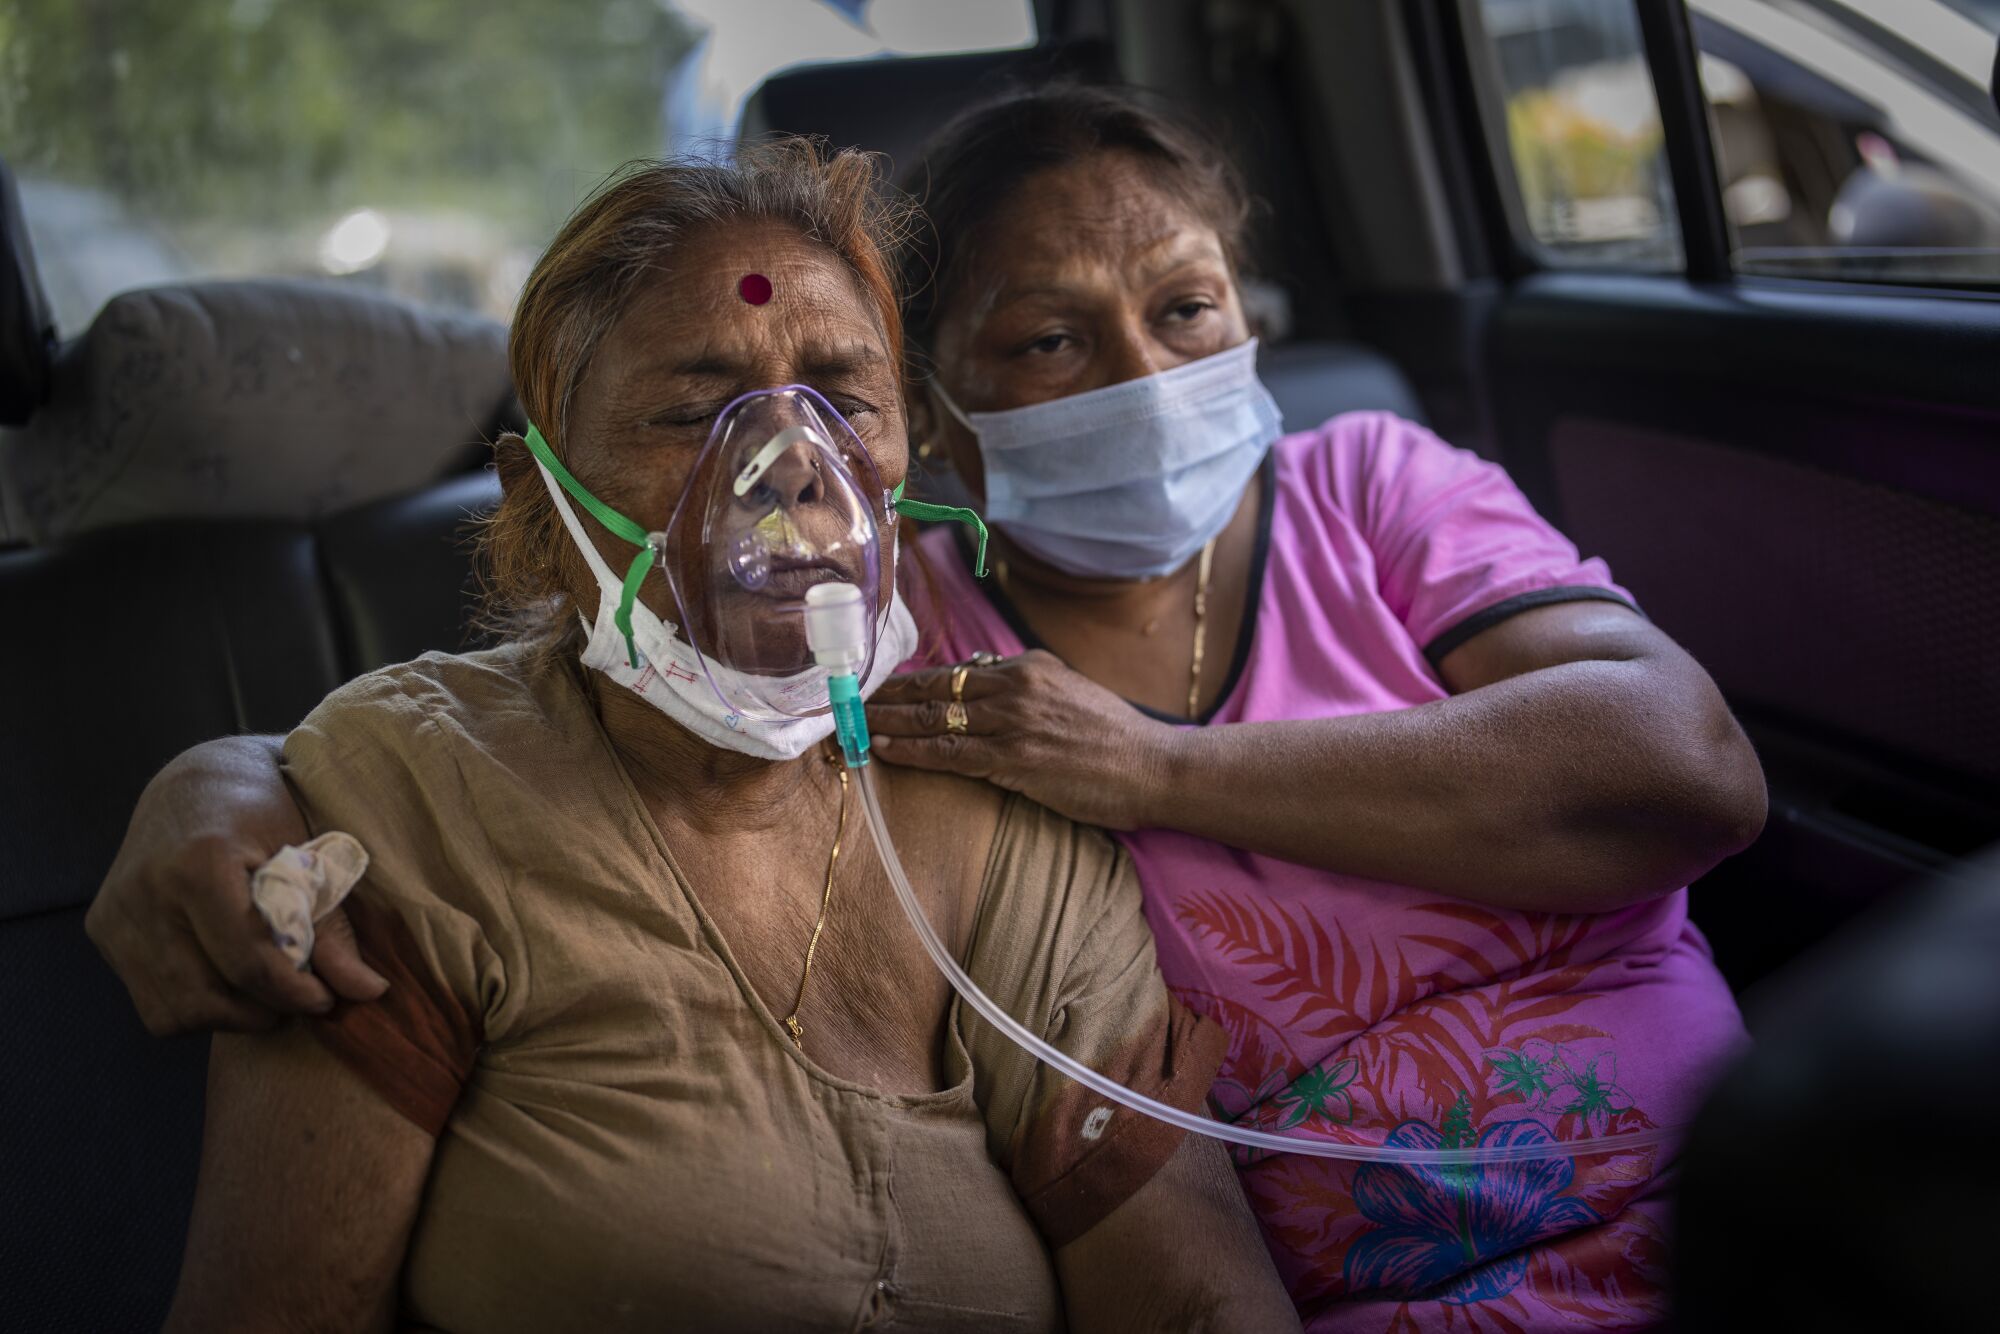 A COVID-19 patient, left, receives oxygen inside a car. With her is another woman.